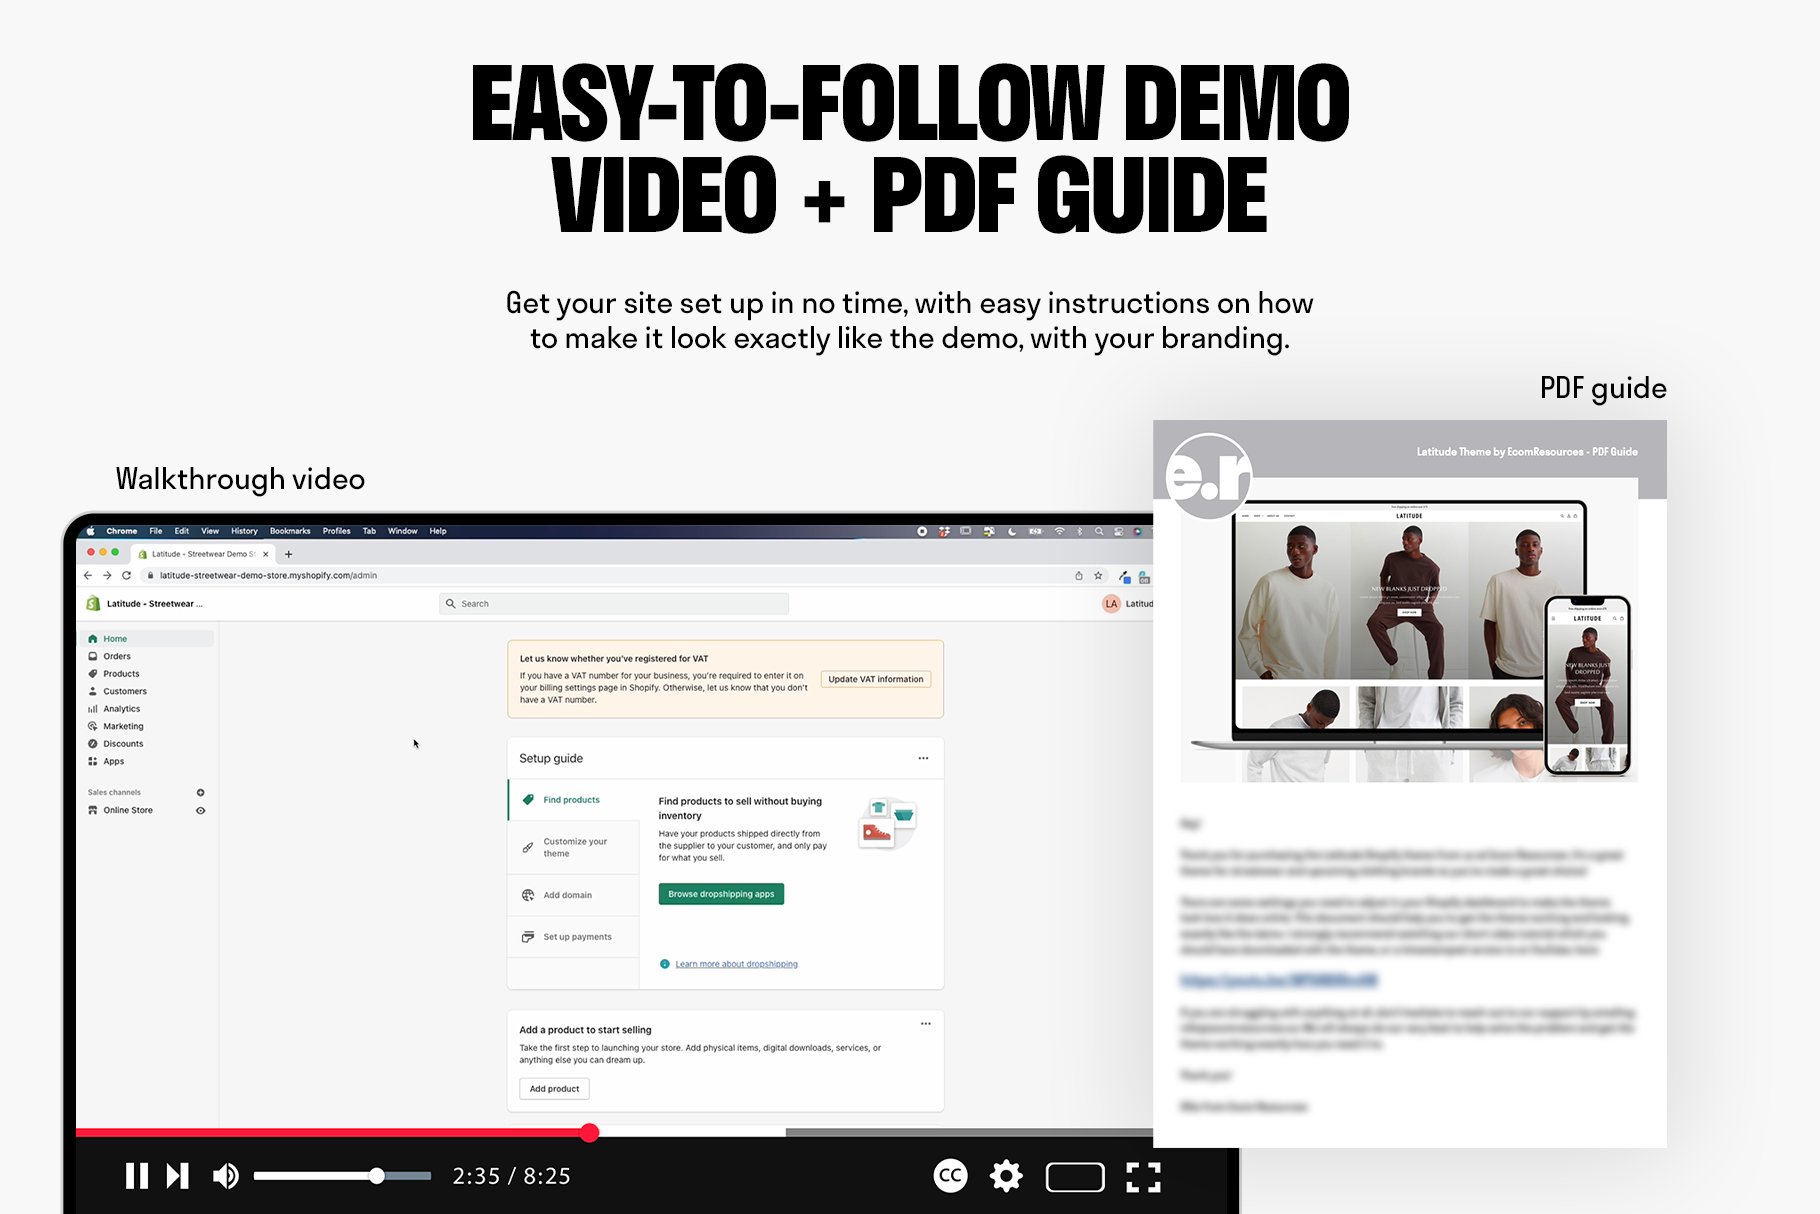 Get your site set up in no time with easy instructions on how to make it look exactly like the demo with your branding.